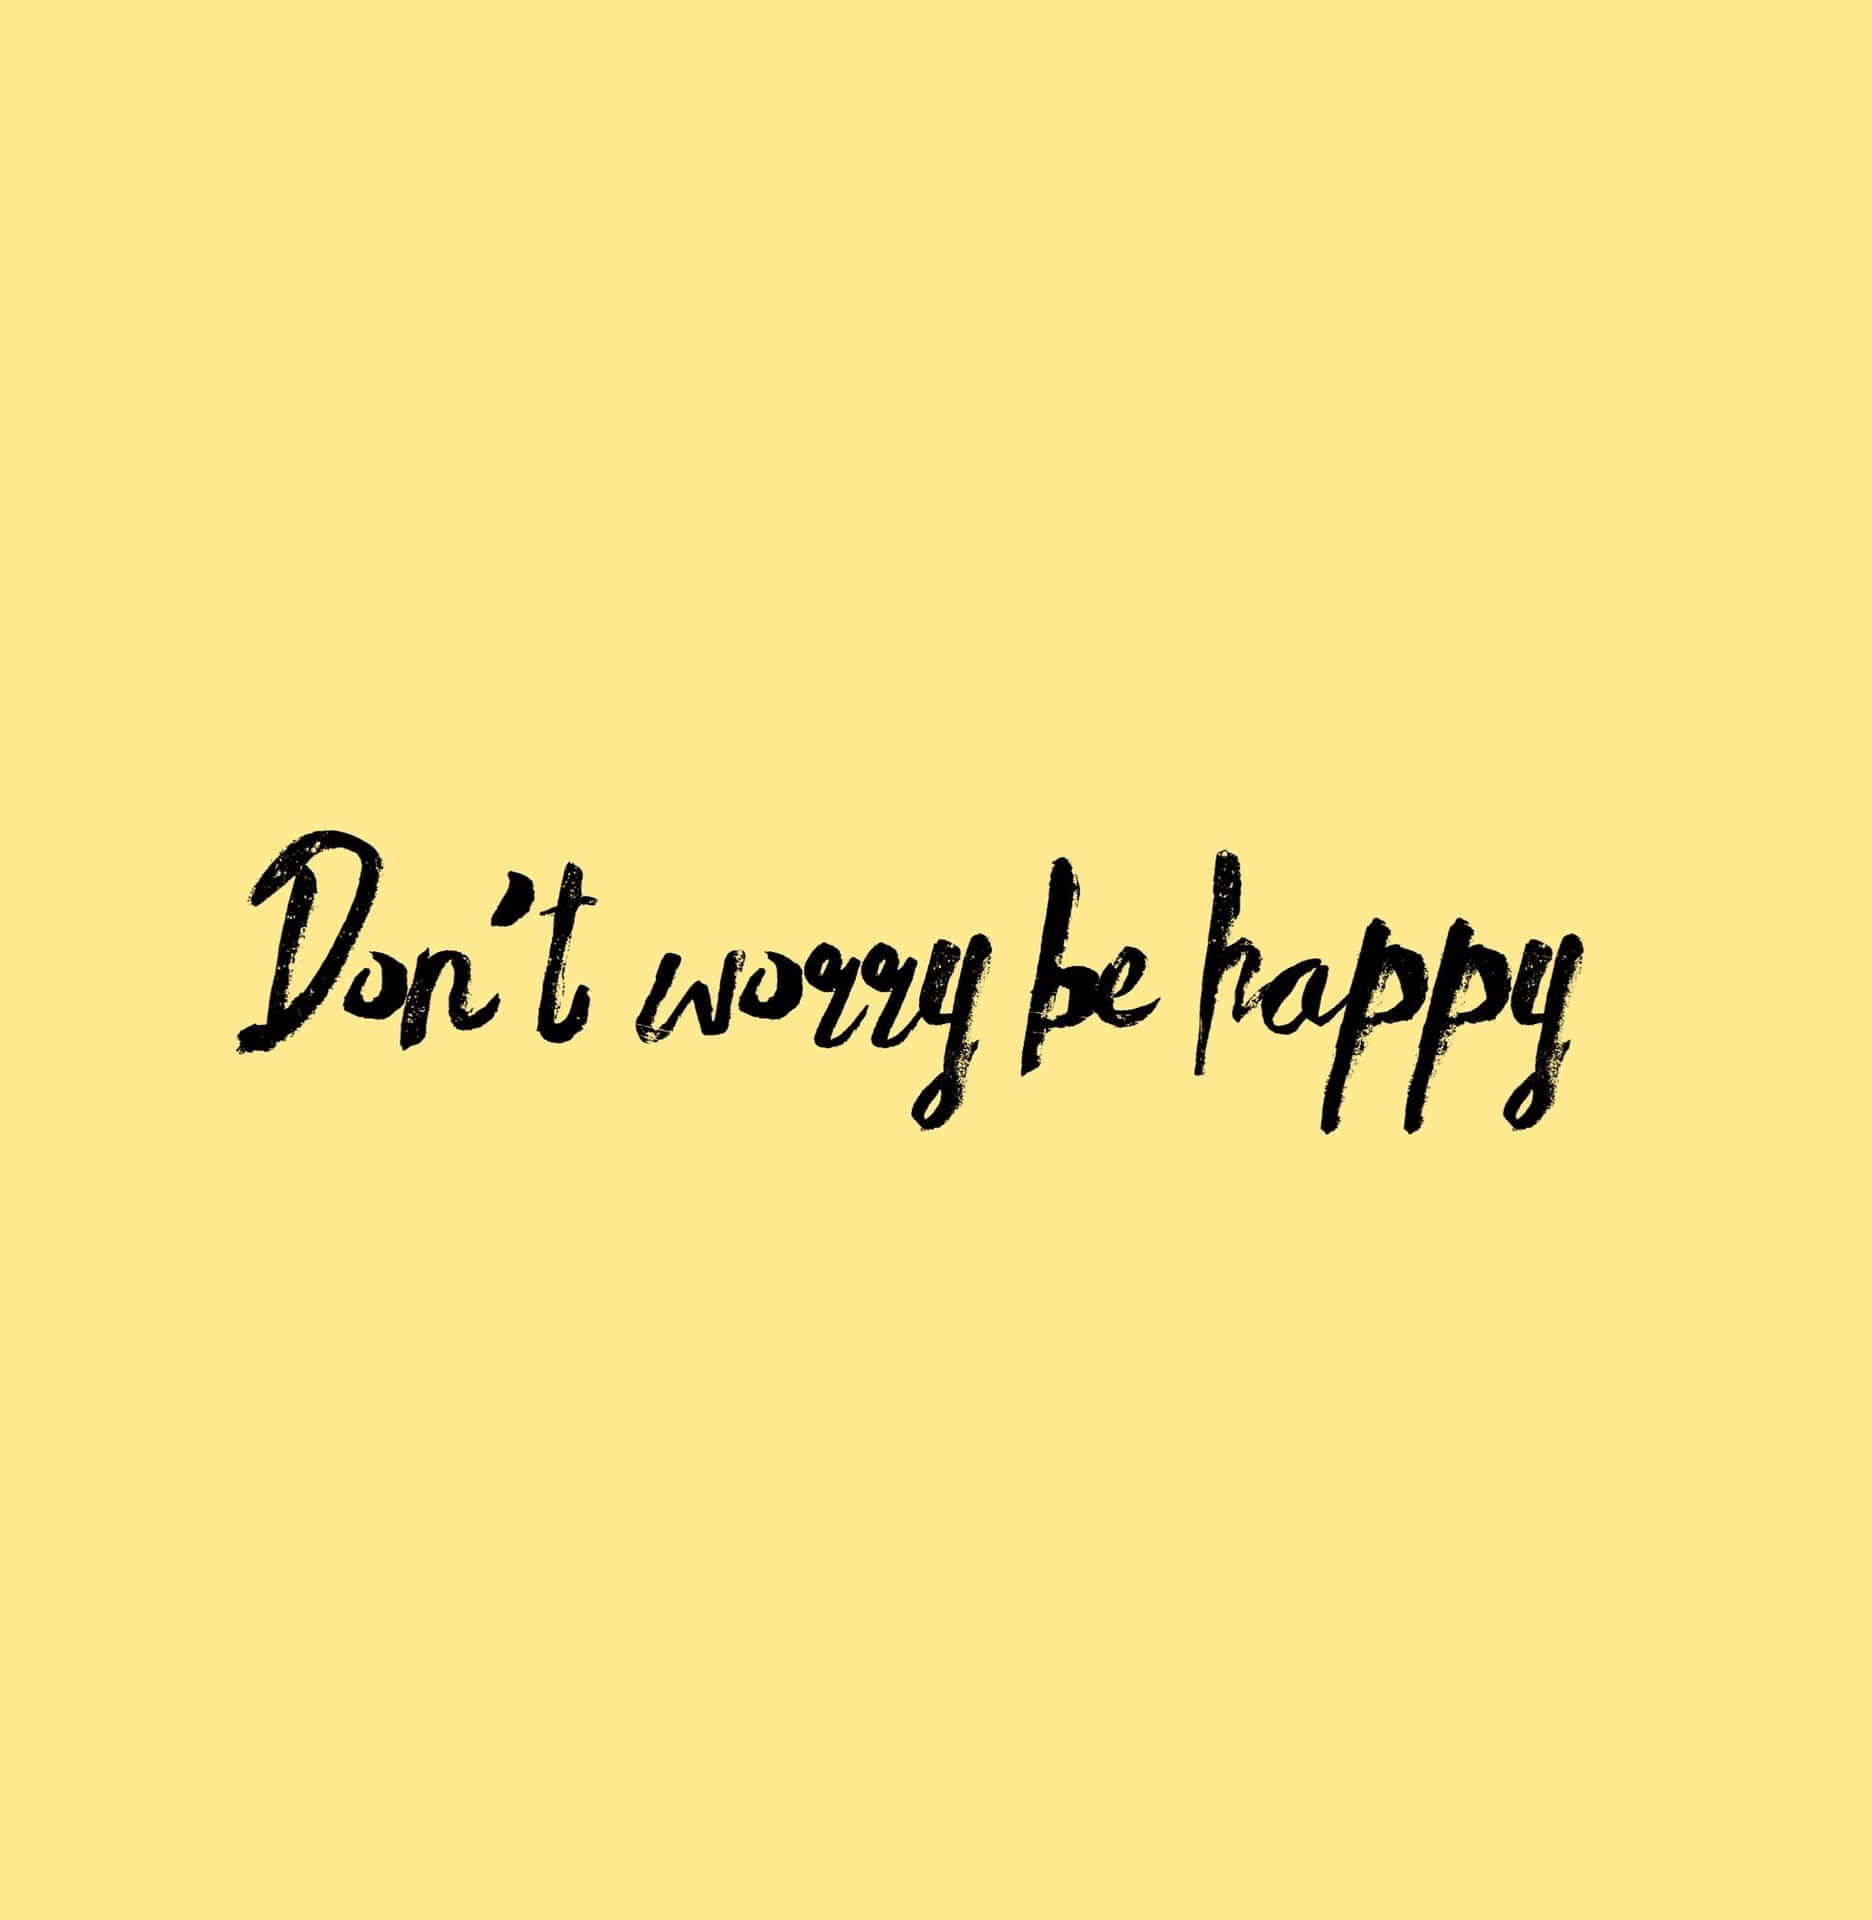 Don't Worry, Be Happy and Enjoy Life Wallpaper